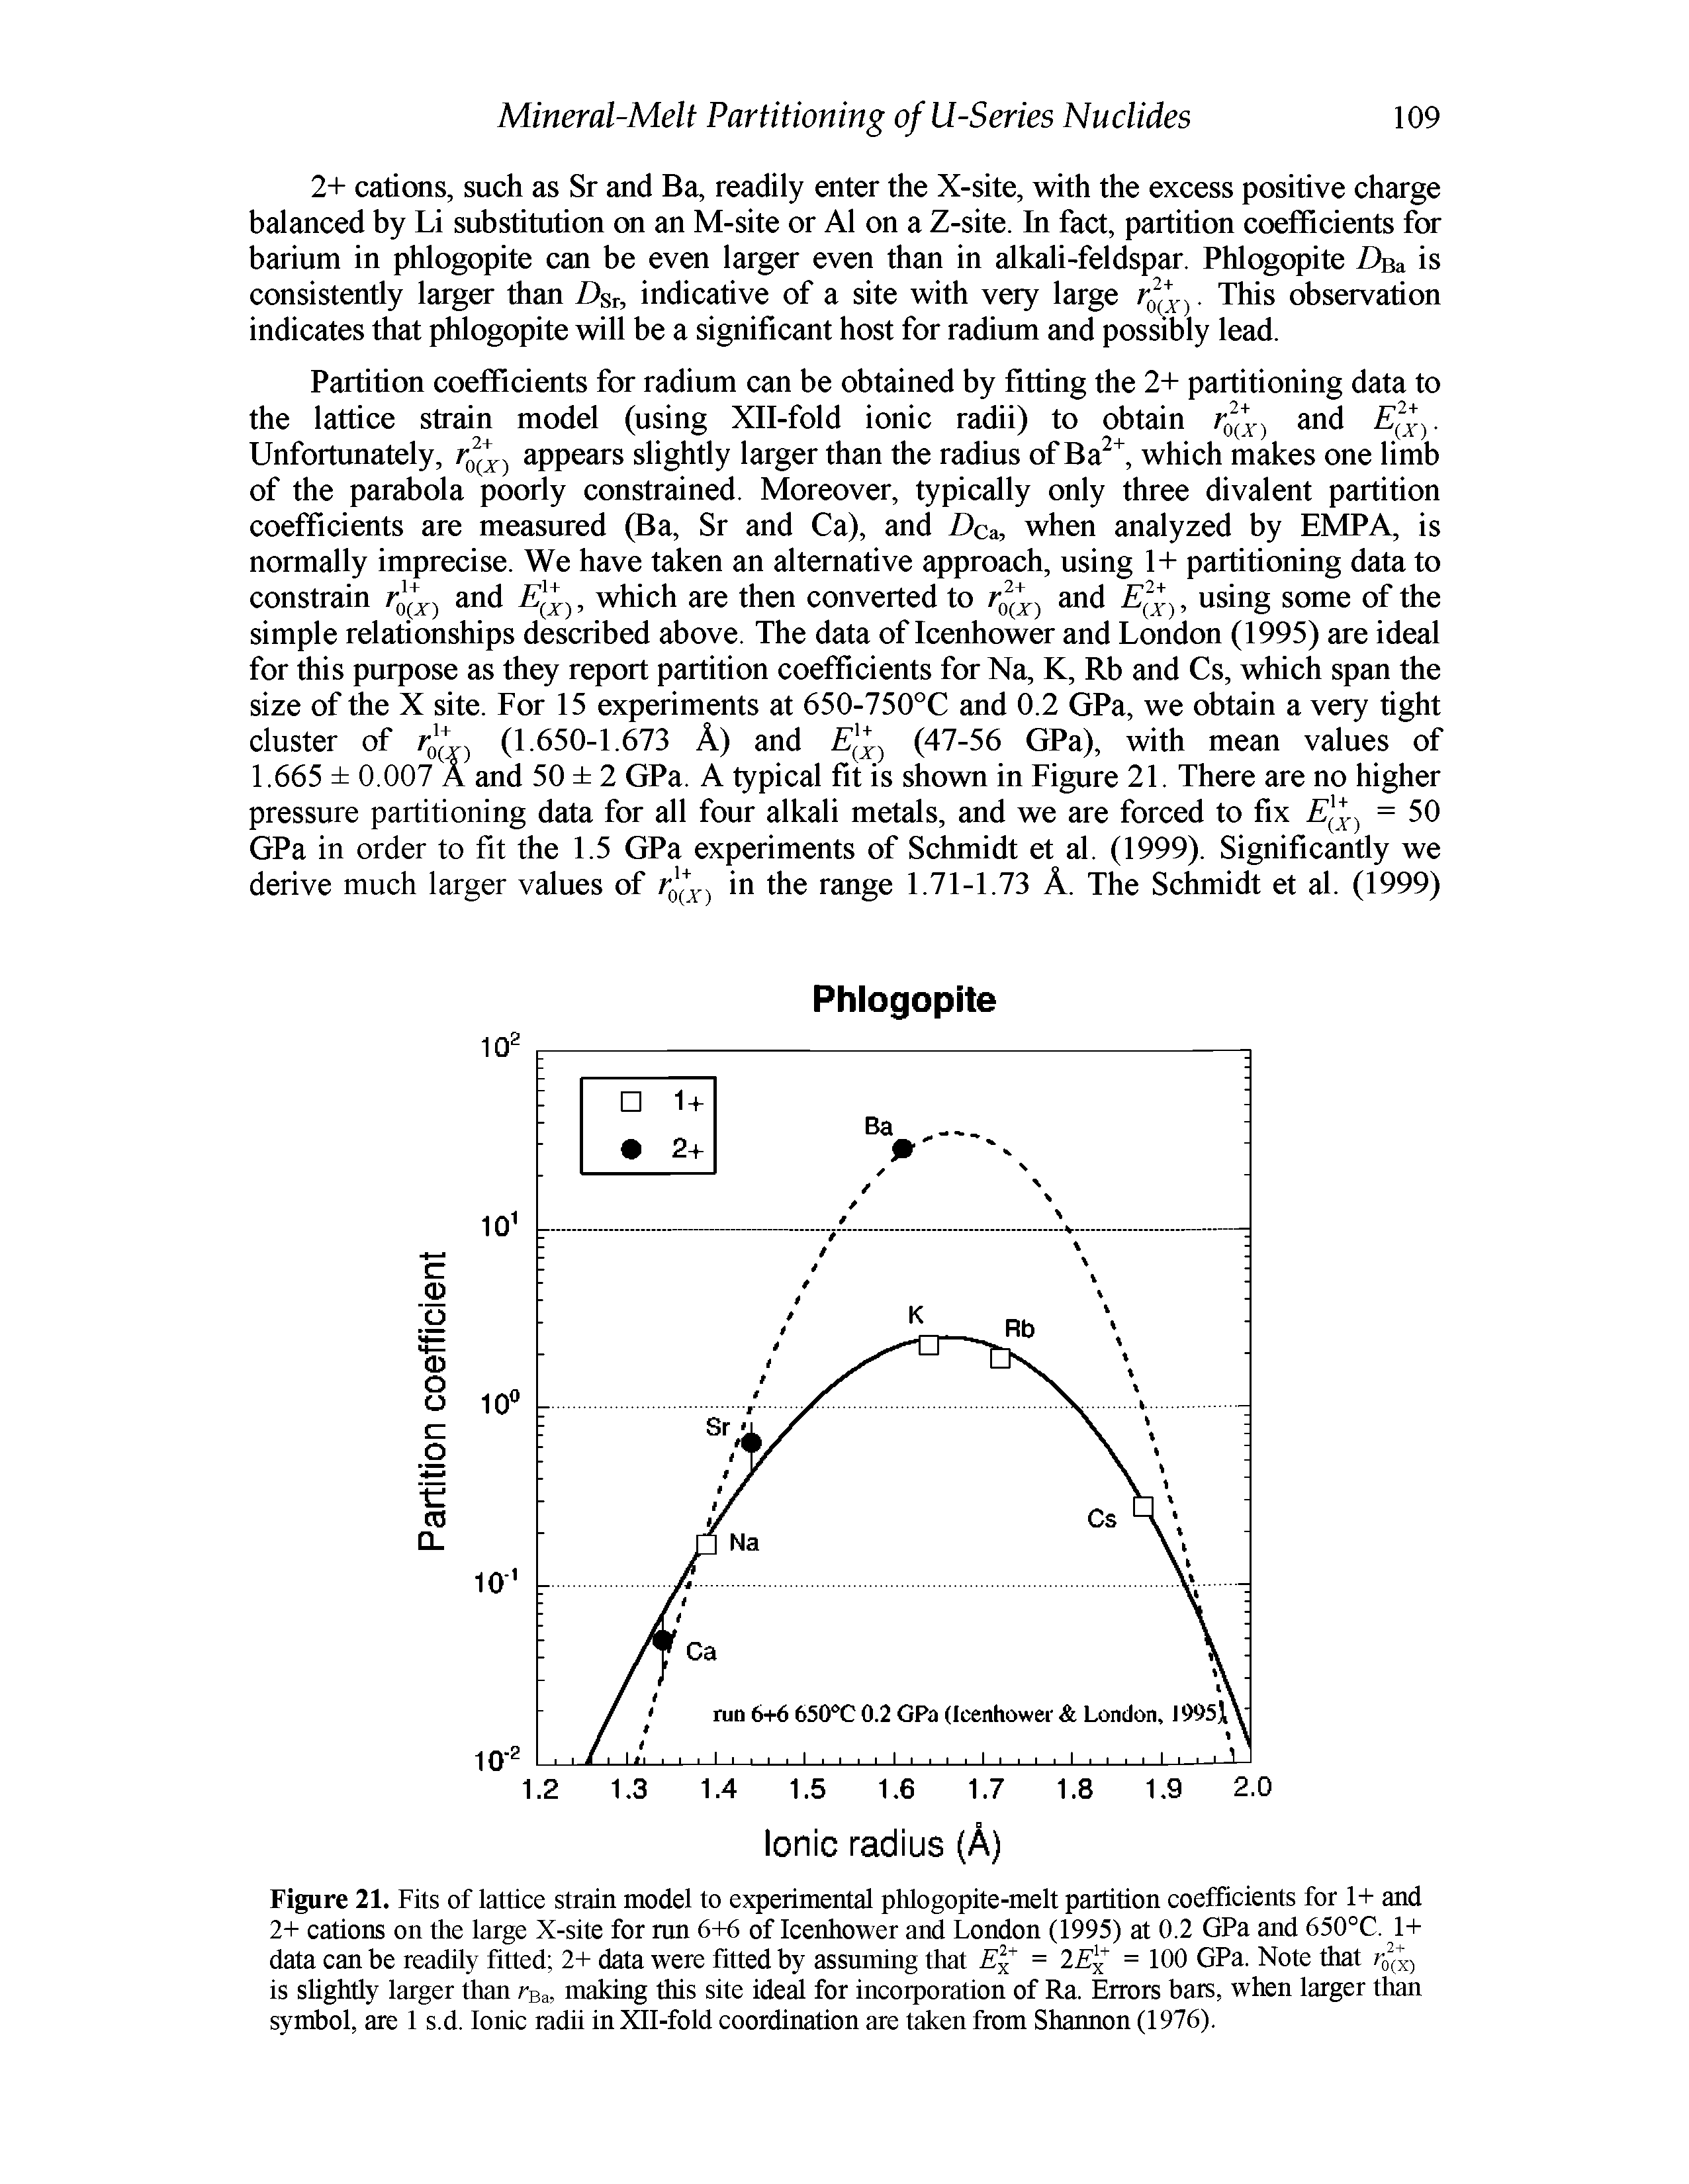 Figure 21. Fits of lattice strain model to experimental phlogopite-melt partition coefficients for 1+ and 2+ cations on the large X-site for mn 6+6 of Icenhower and London (1995) at 0.2 GPa and 650°C. 1+ data can be readily fitted 2+ data were fitted by assuming that = lE = 100 GPa. Note that r (x) is slightly larger than rsa, making this site ided for incorporation of Ra. Errors bars, when larger than symbol, are 1 s.d. Ionic radii in Xll-fold coordination are taken from Shaimon (1976).